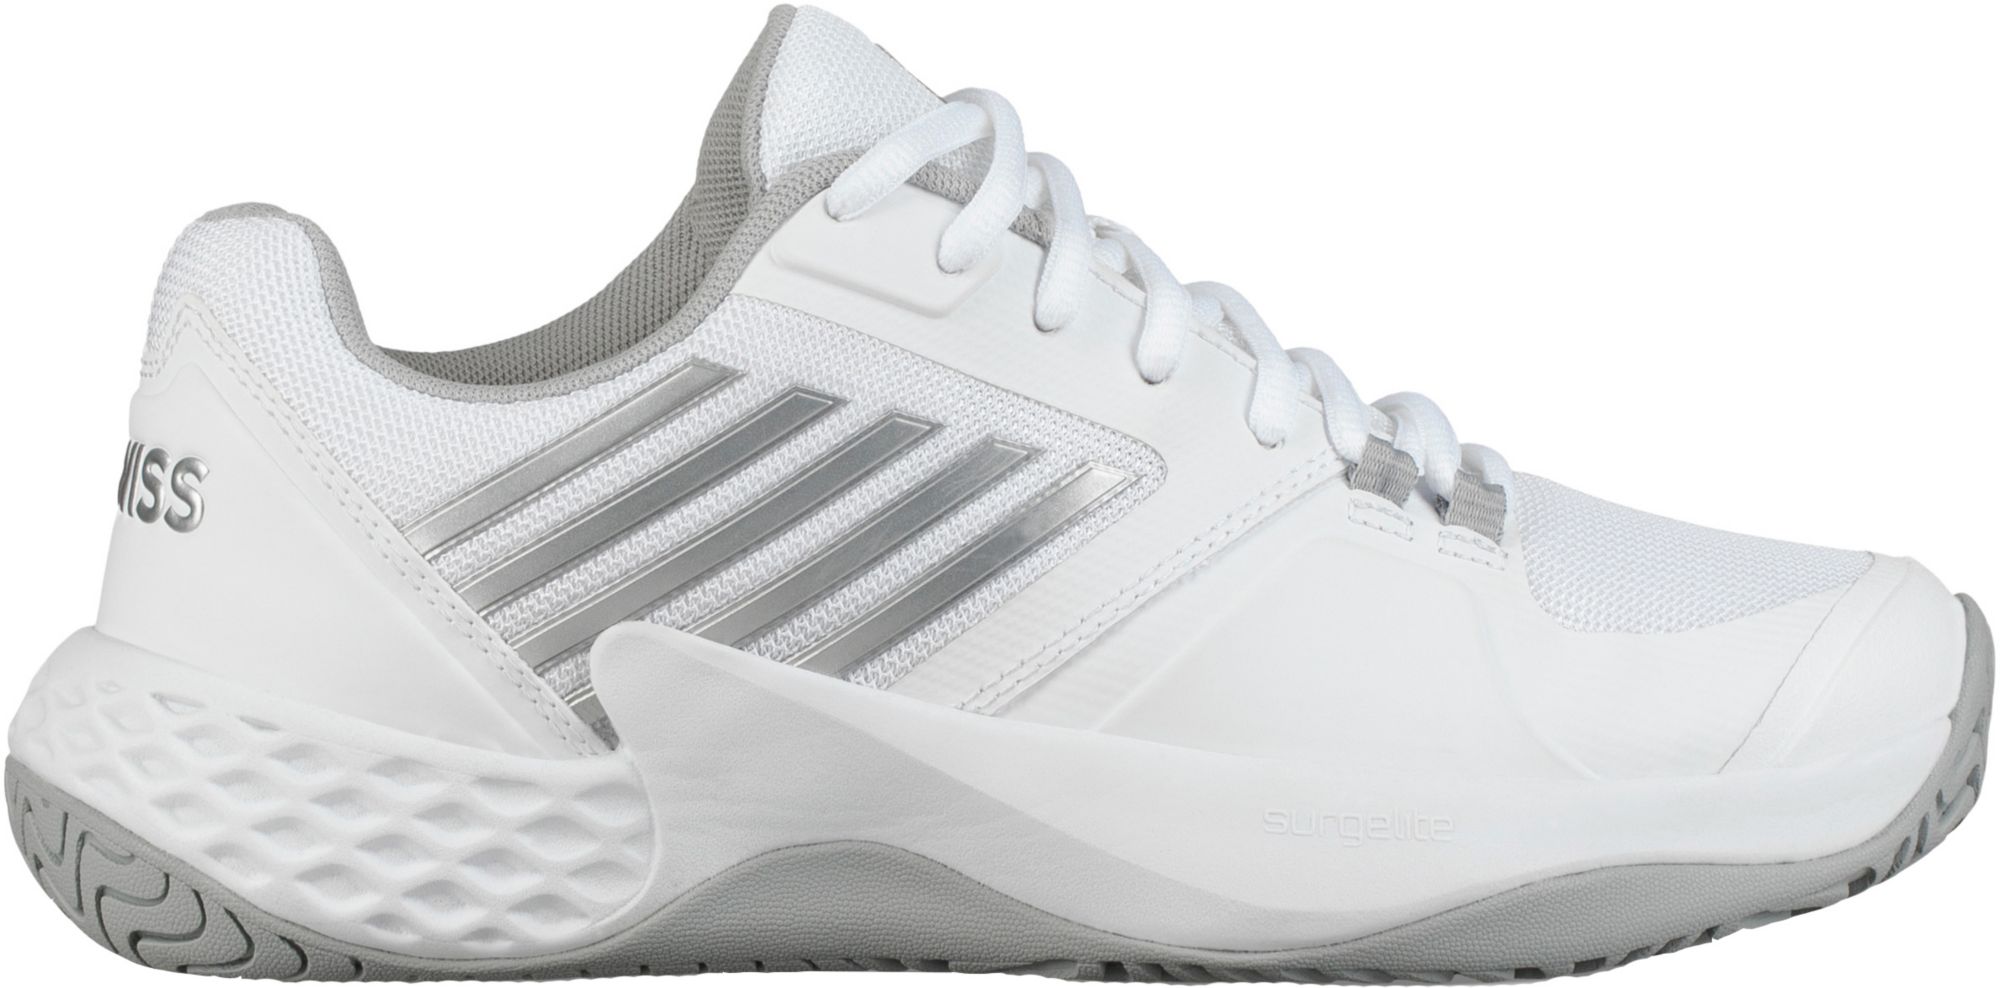 kswiss womens court shoes